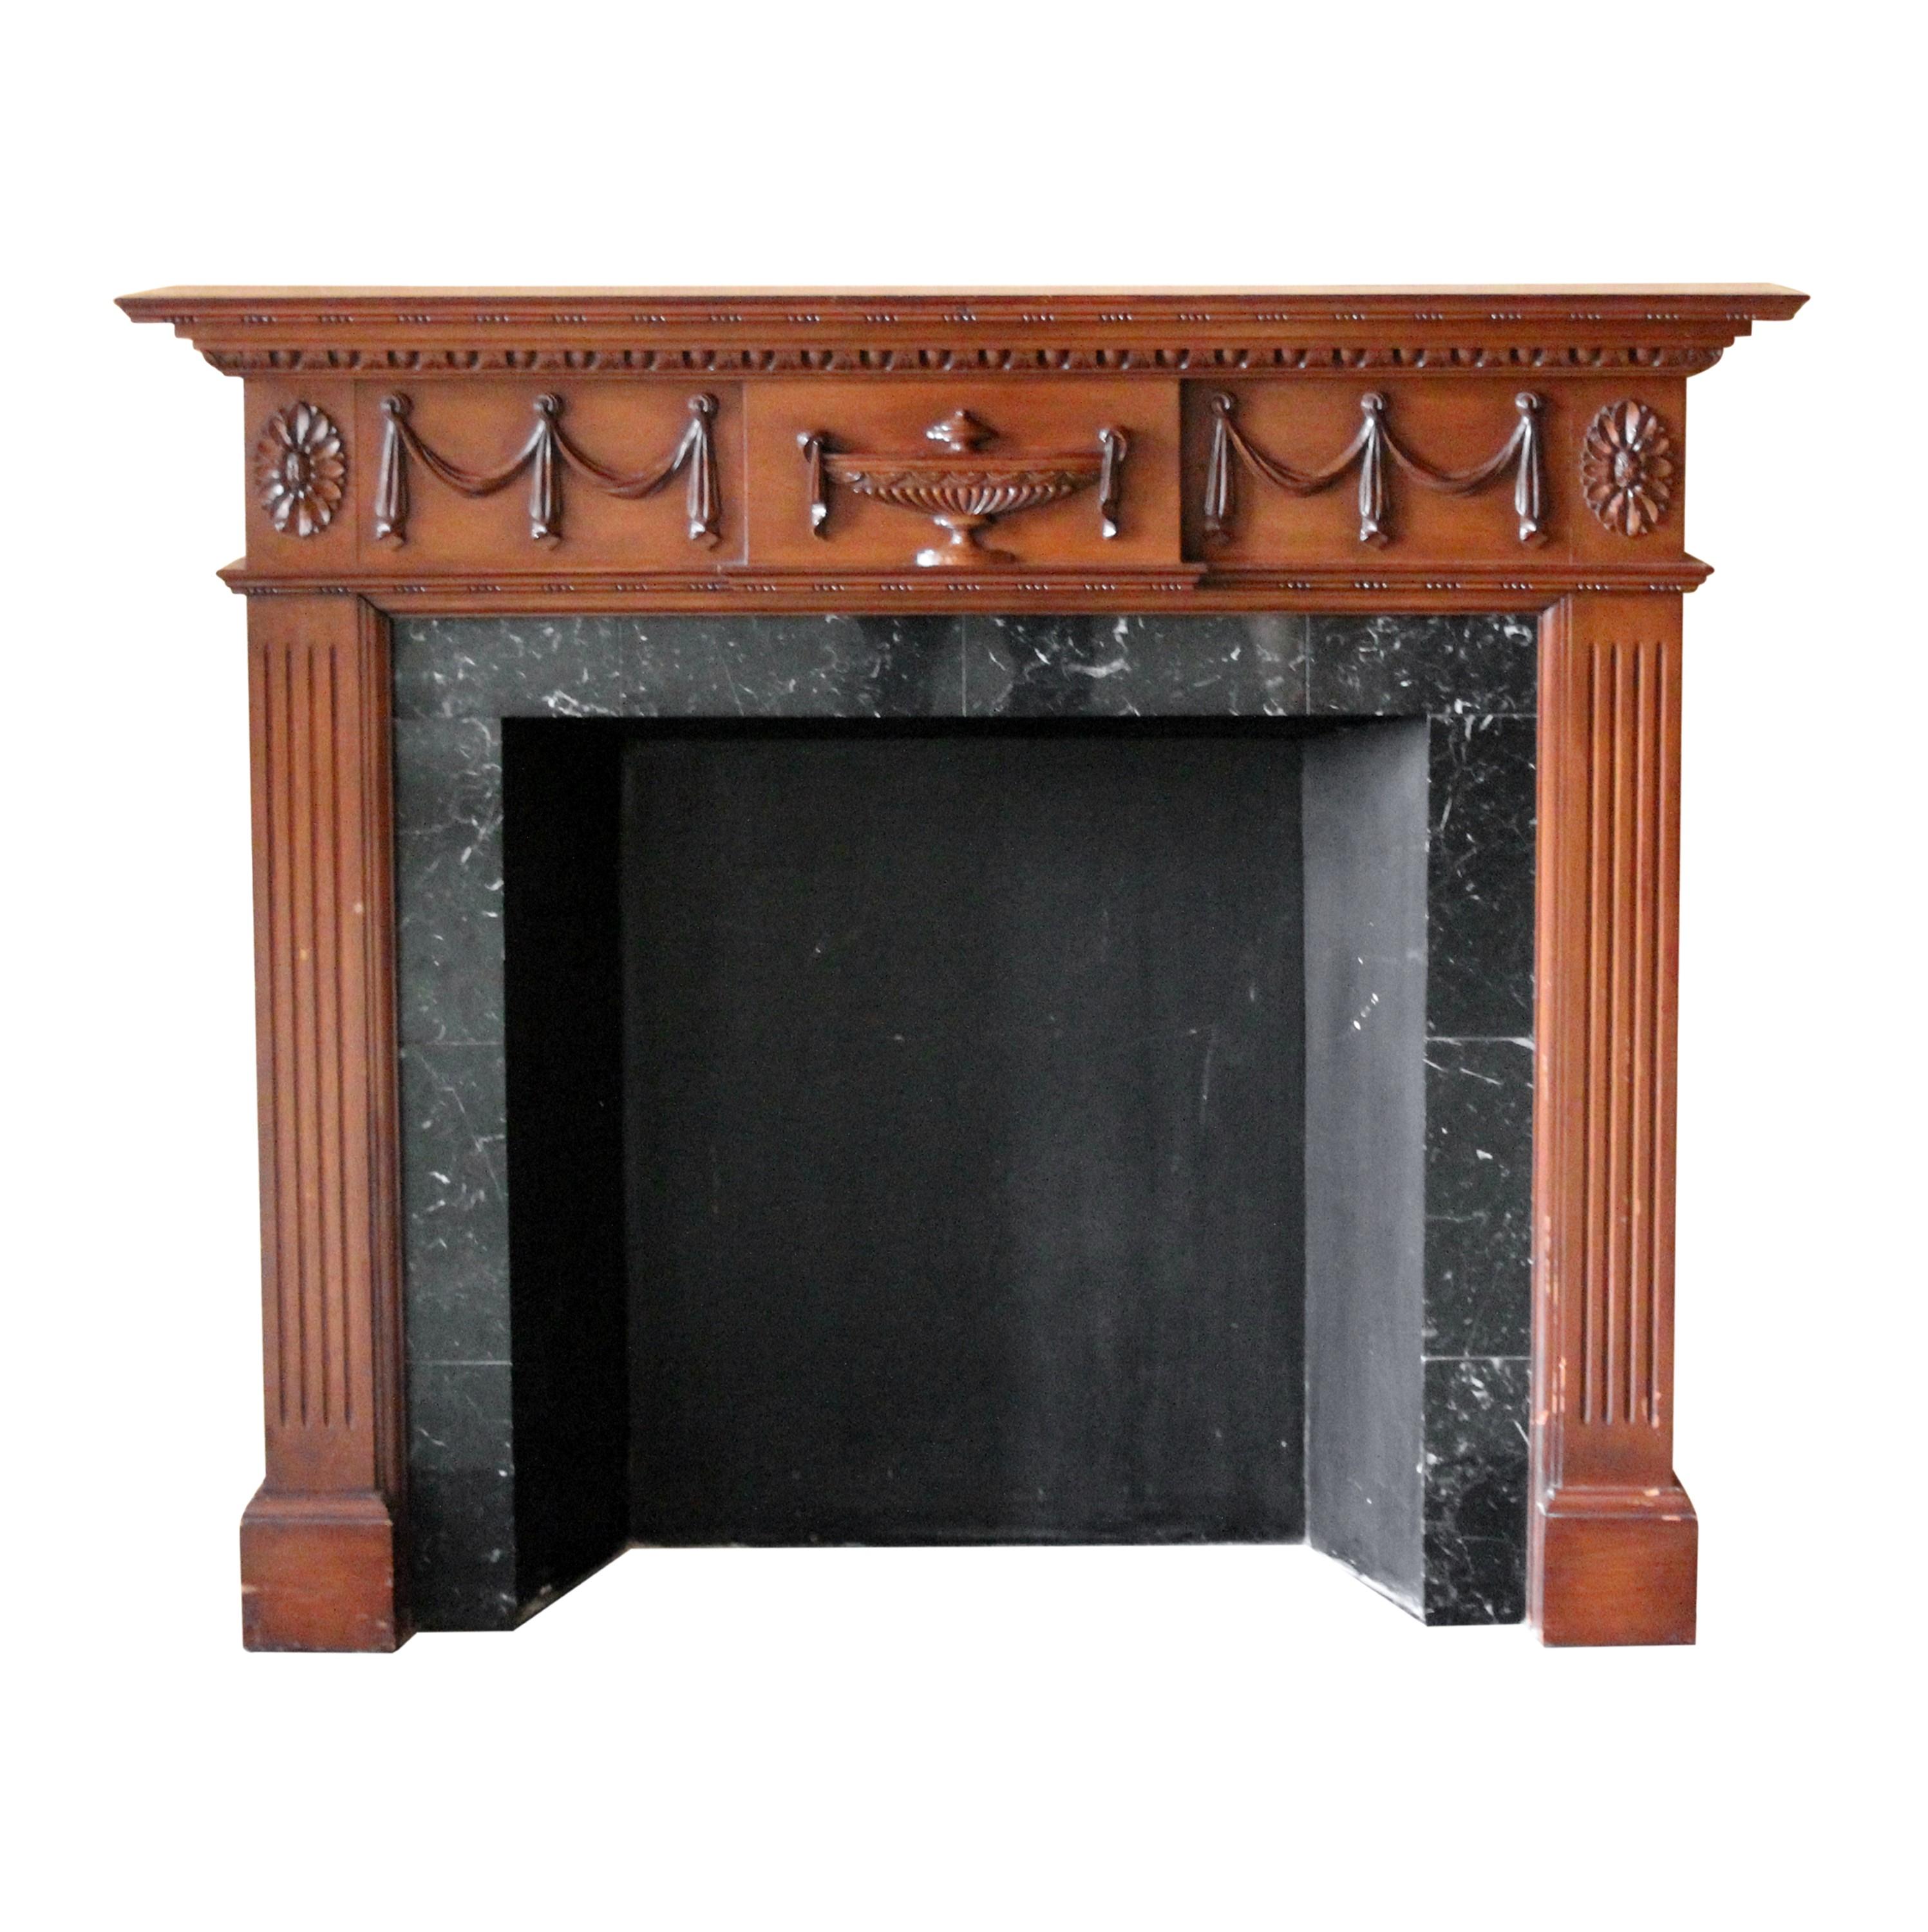 Ornate carved wood mantel from the famous NYC Waldorf Astoria Hotel featuring a dark tone natural finish. There are urn, ribbon, floral and egg & dart details and fluted columns. Unfortunately doesn't include the marble insert or the hearth. This is